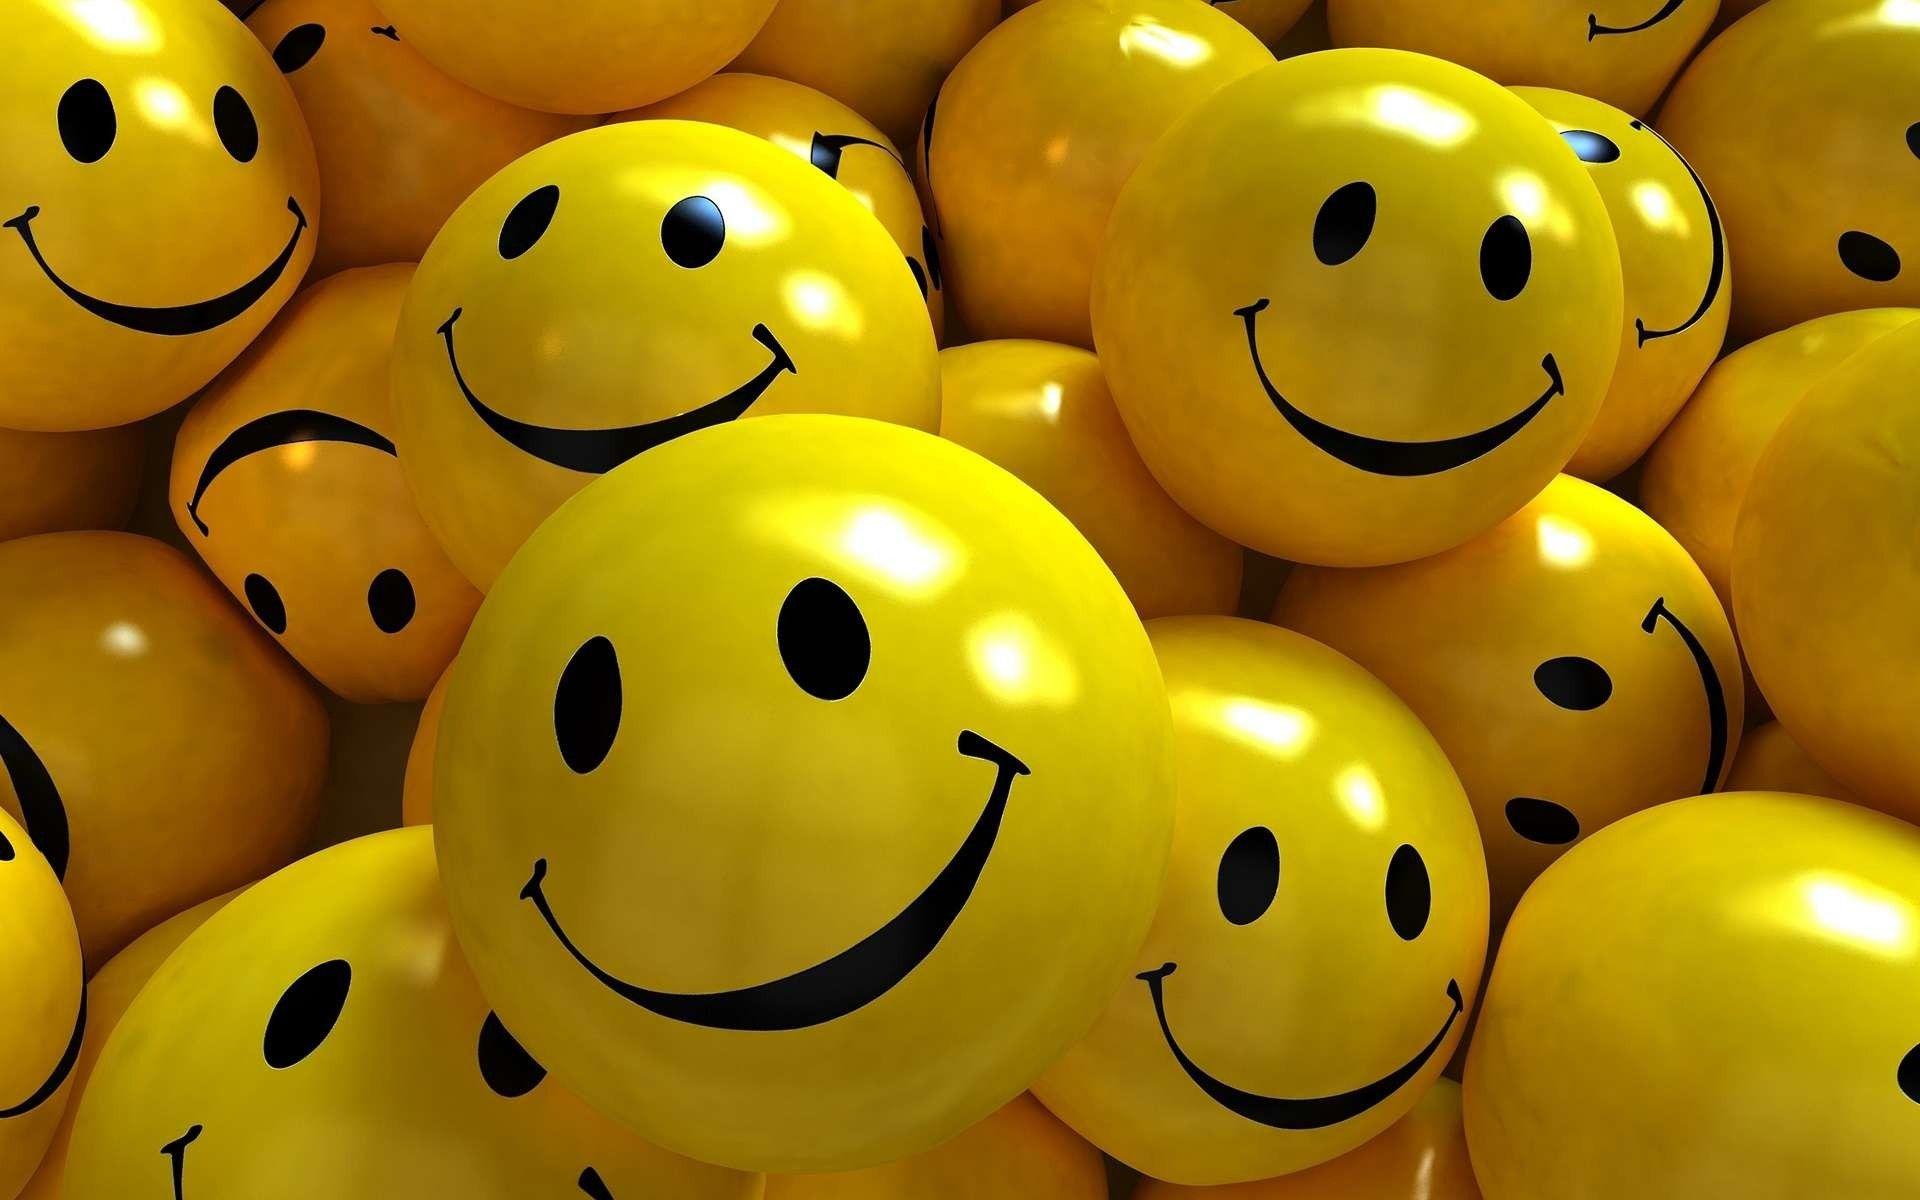 Big Smiley Face Wallpapers - Top Free